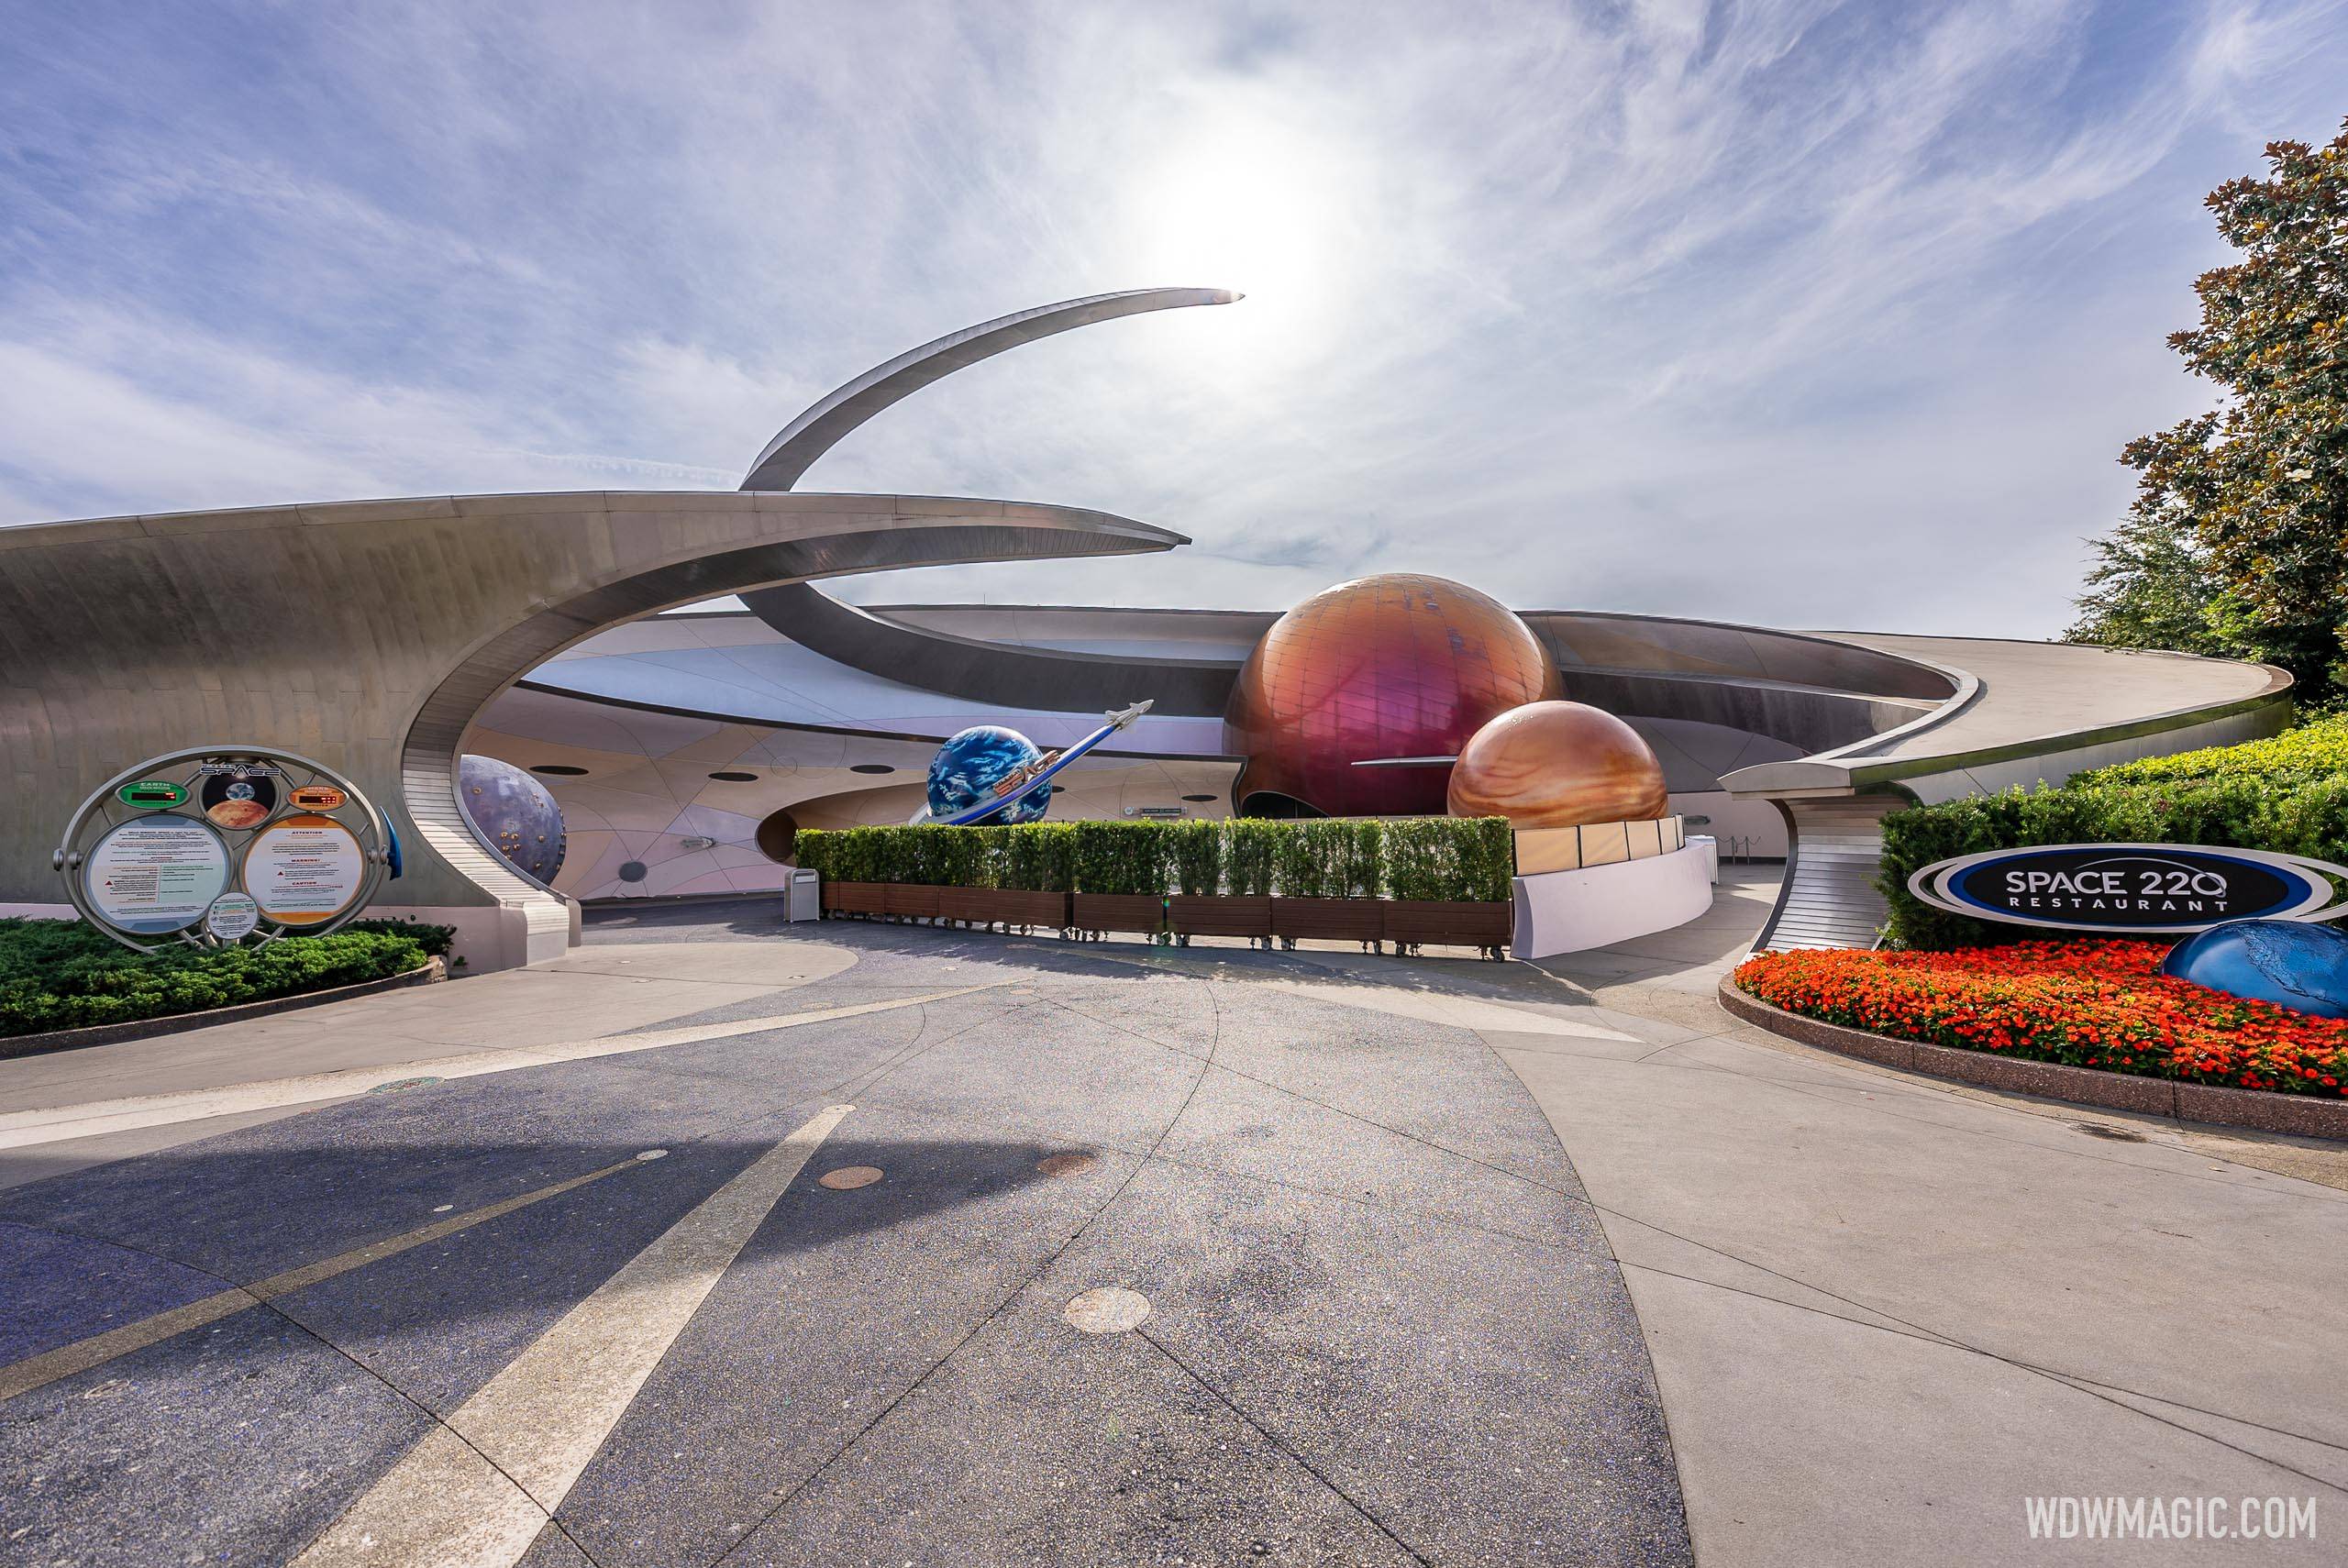 EPCOT's Mission SPACE set to undergo exterior refresh